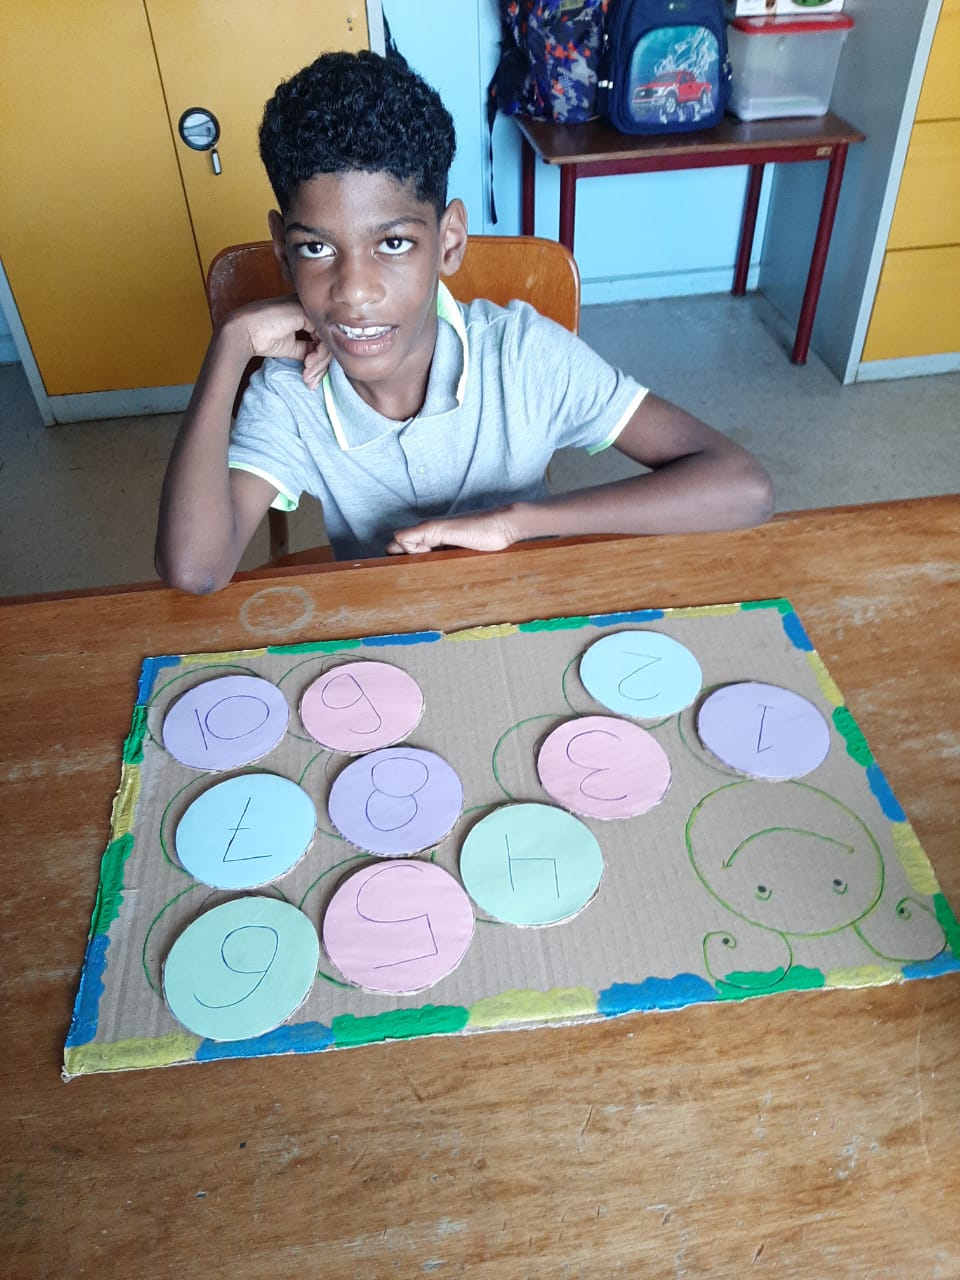 A young child plays a game that is hand drawn on cardboard.